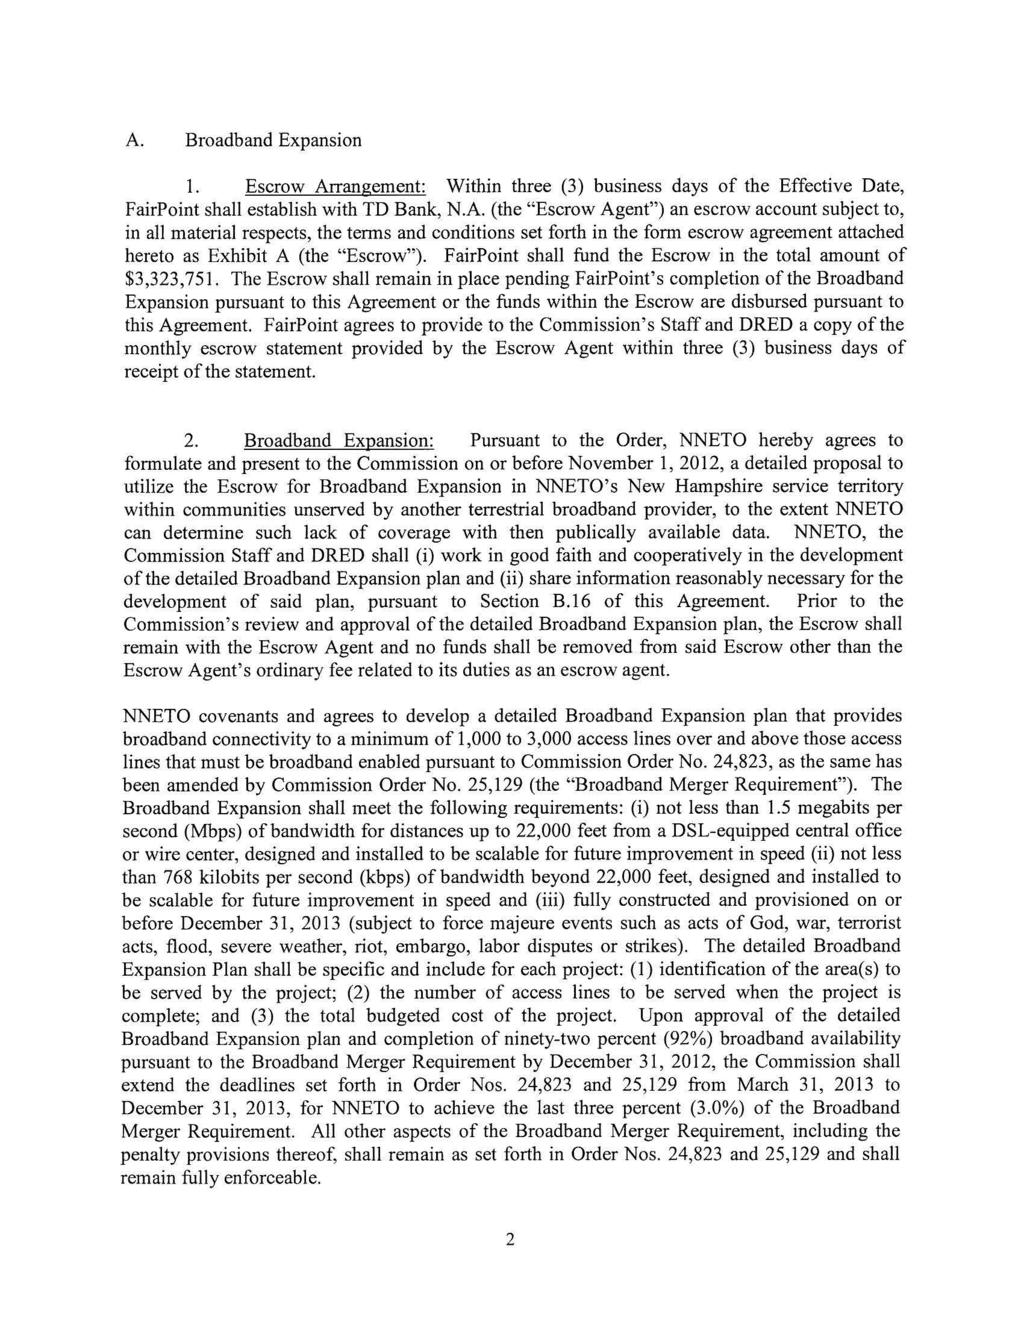 A. Broadband Expansion 1. Escrow Arrangement: Within three (3) business days of the Effective Date, FairPoint shall establish with TD Bank, N.A. (the "Escrow Agent") an escrow account subject to, in all material respects, the terms and conditions set forth in the form escrow agreement attached hereto as Exhibit A (the "Escrow").